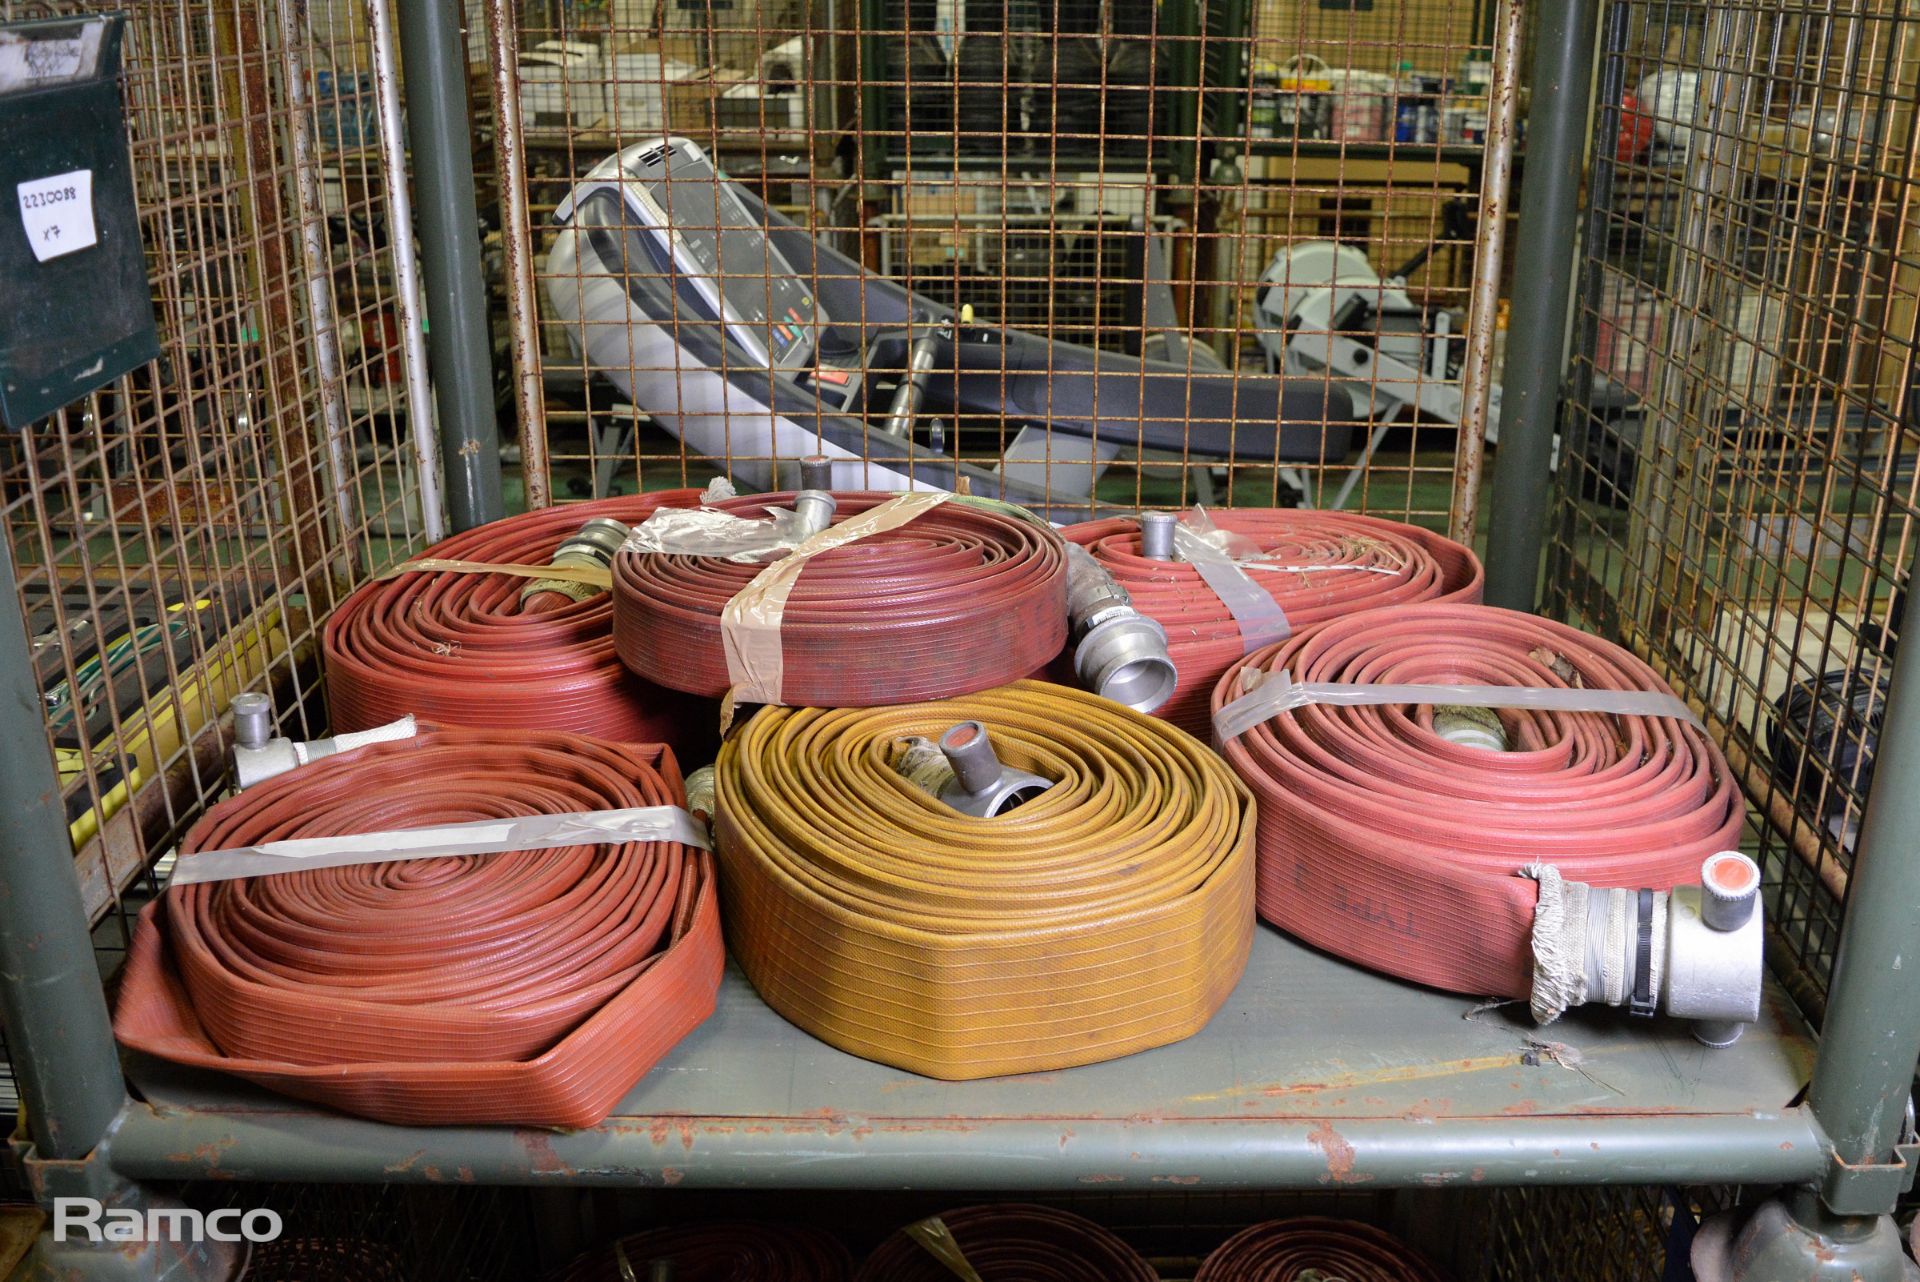 7x Various lengths and sizes of layflat hose